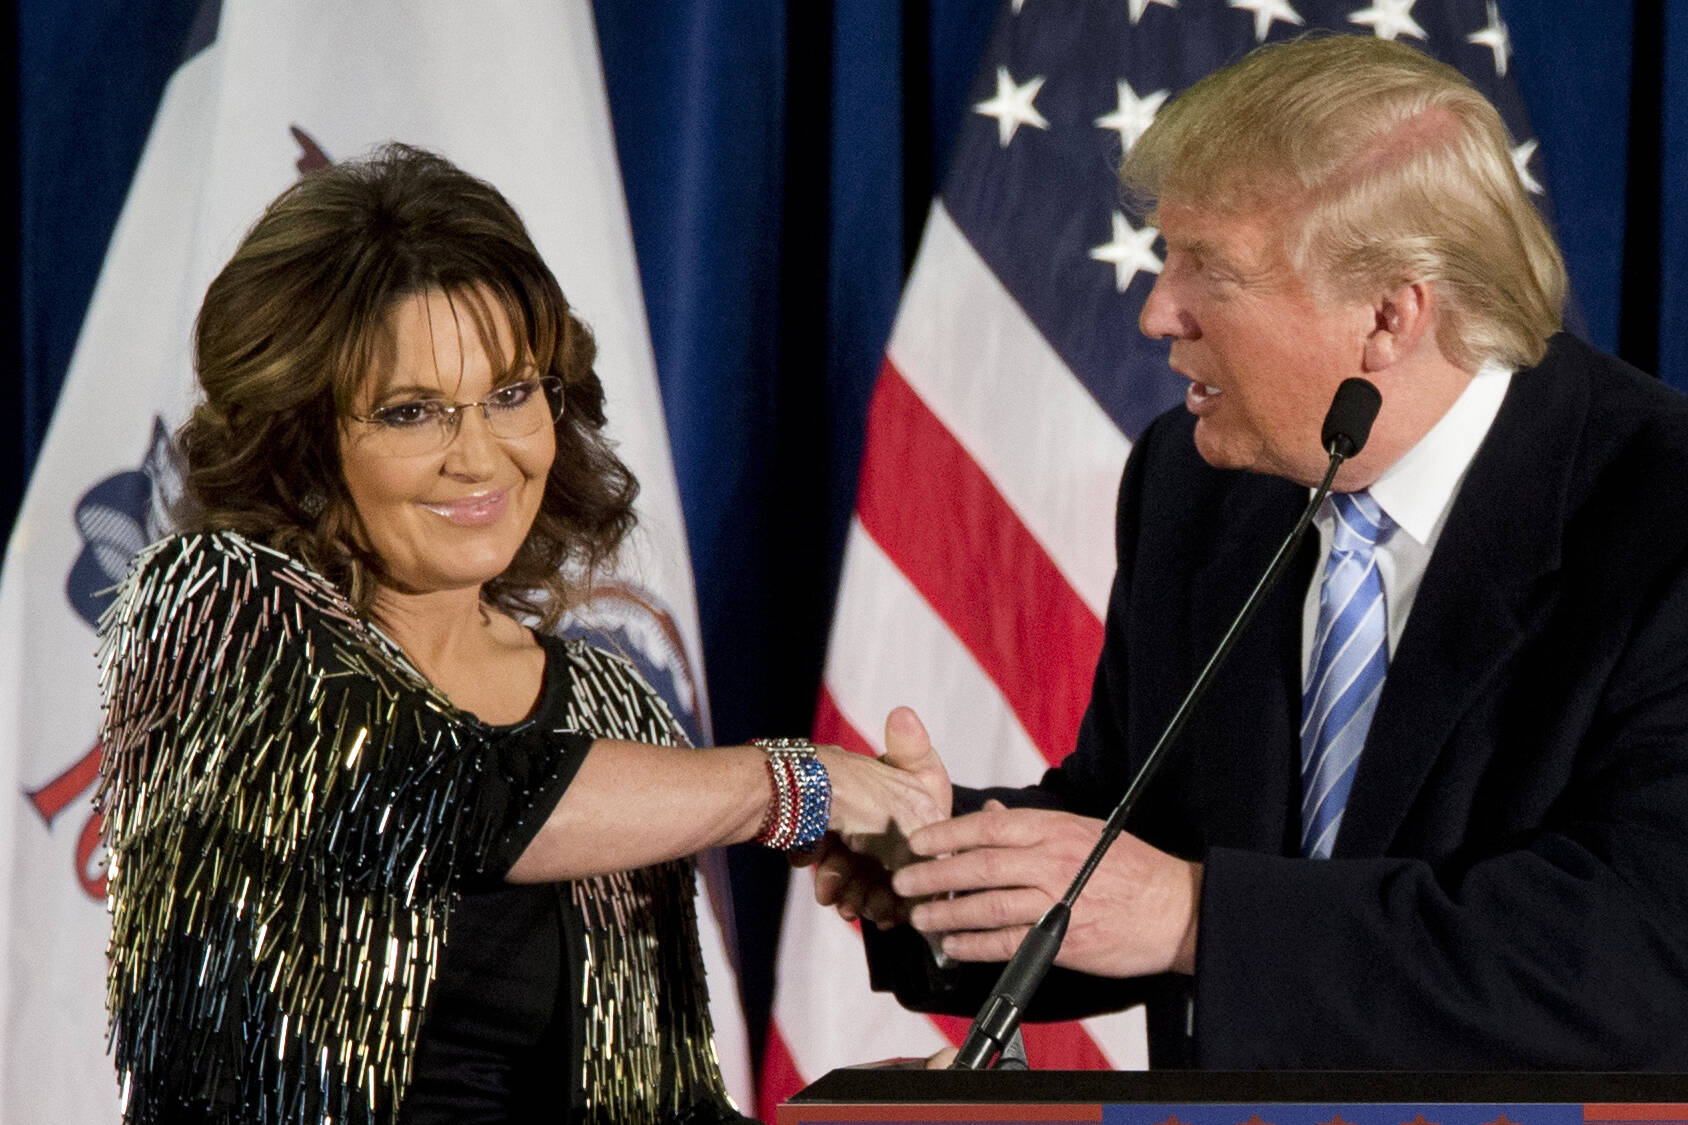 Former Alaska Gov. Sarah Palin, left, appears with then-Republican presidential candidate Donald Trump at a rally at the Iowa State University on Jan. 19, 2016, in Ames, Iowa. Former Alaska Gov. Sarah Palin has picked up a prized endorsement in her bid in an extremely crowded field to fill the unexpired term of the late U.S. Rep. Don Young. Former President Donald Trump backed Palin on Sunday, April 3, 2022, in a statement from his political action committee. (AP Photo/Mary Altaffer, File)